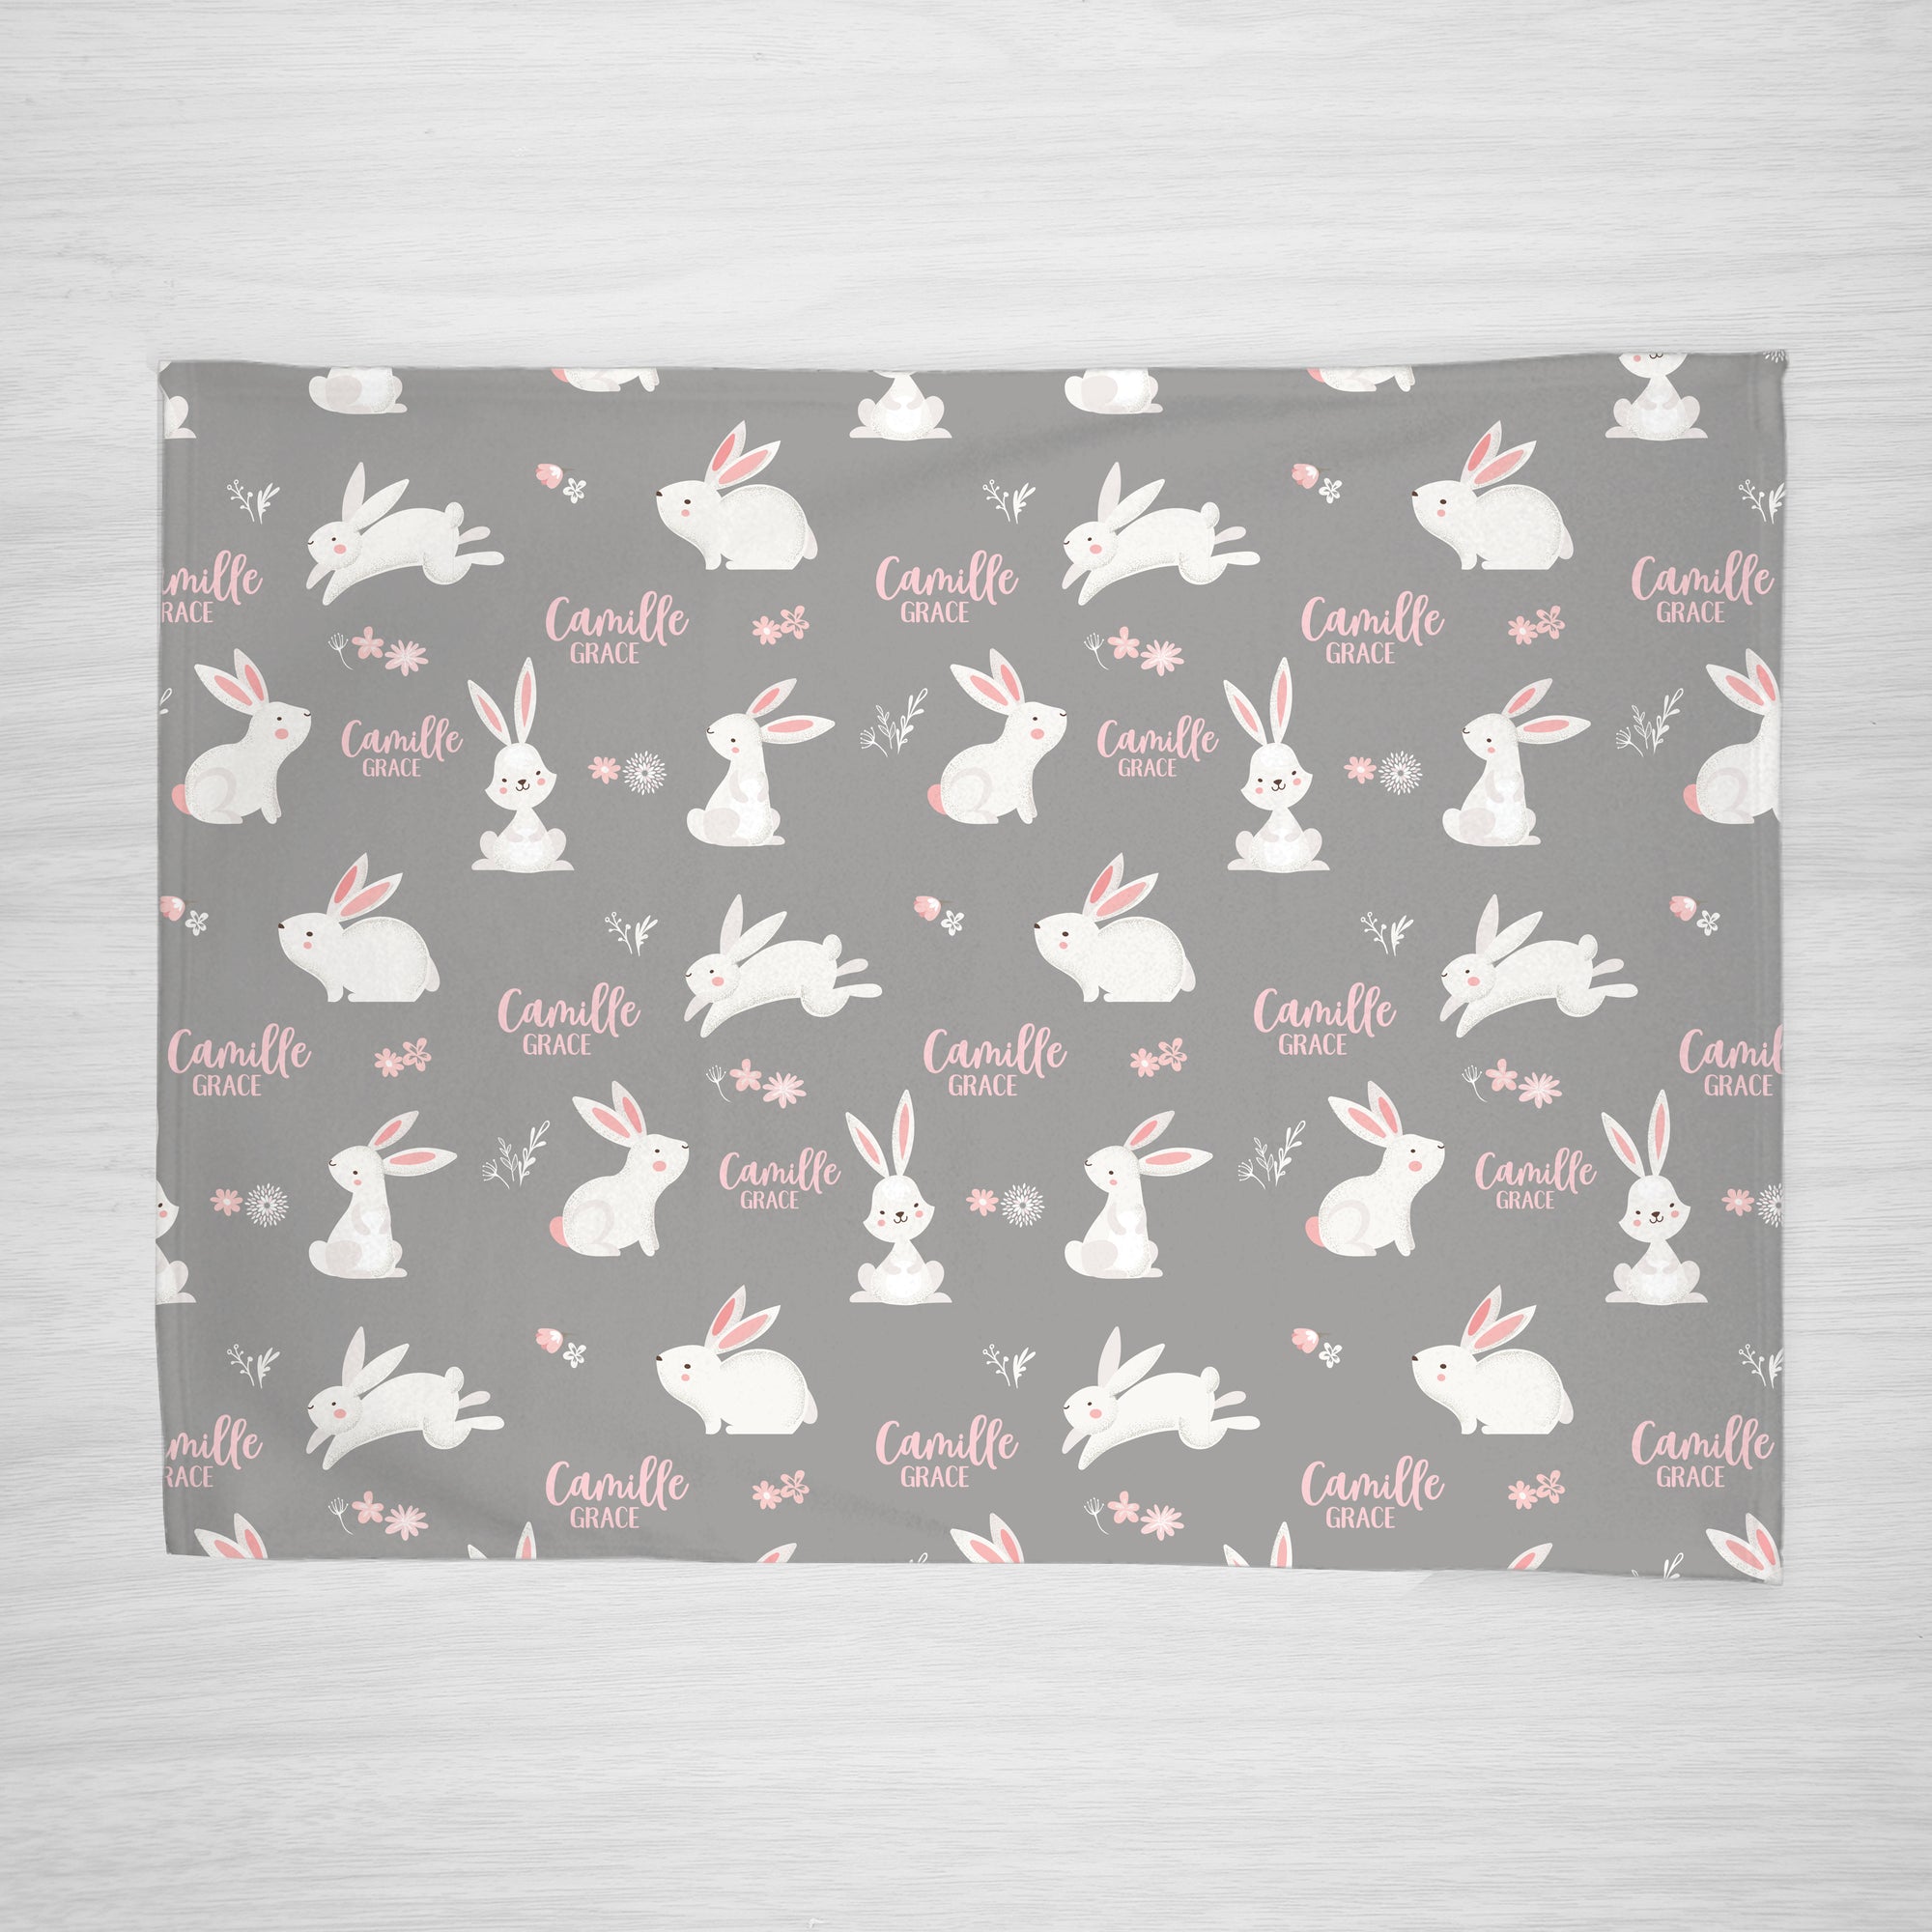 Bunny Rabbit children's blanket, personalized with name. Soft gray fleece background with white and pink accents. Great for babies, toddlers, or older kids, full view